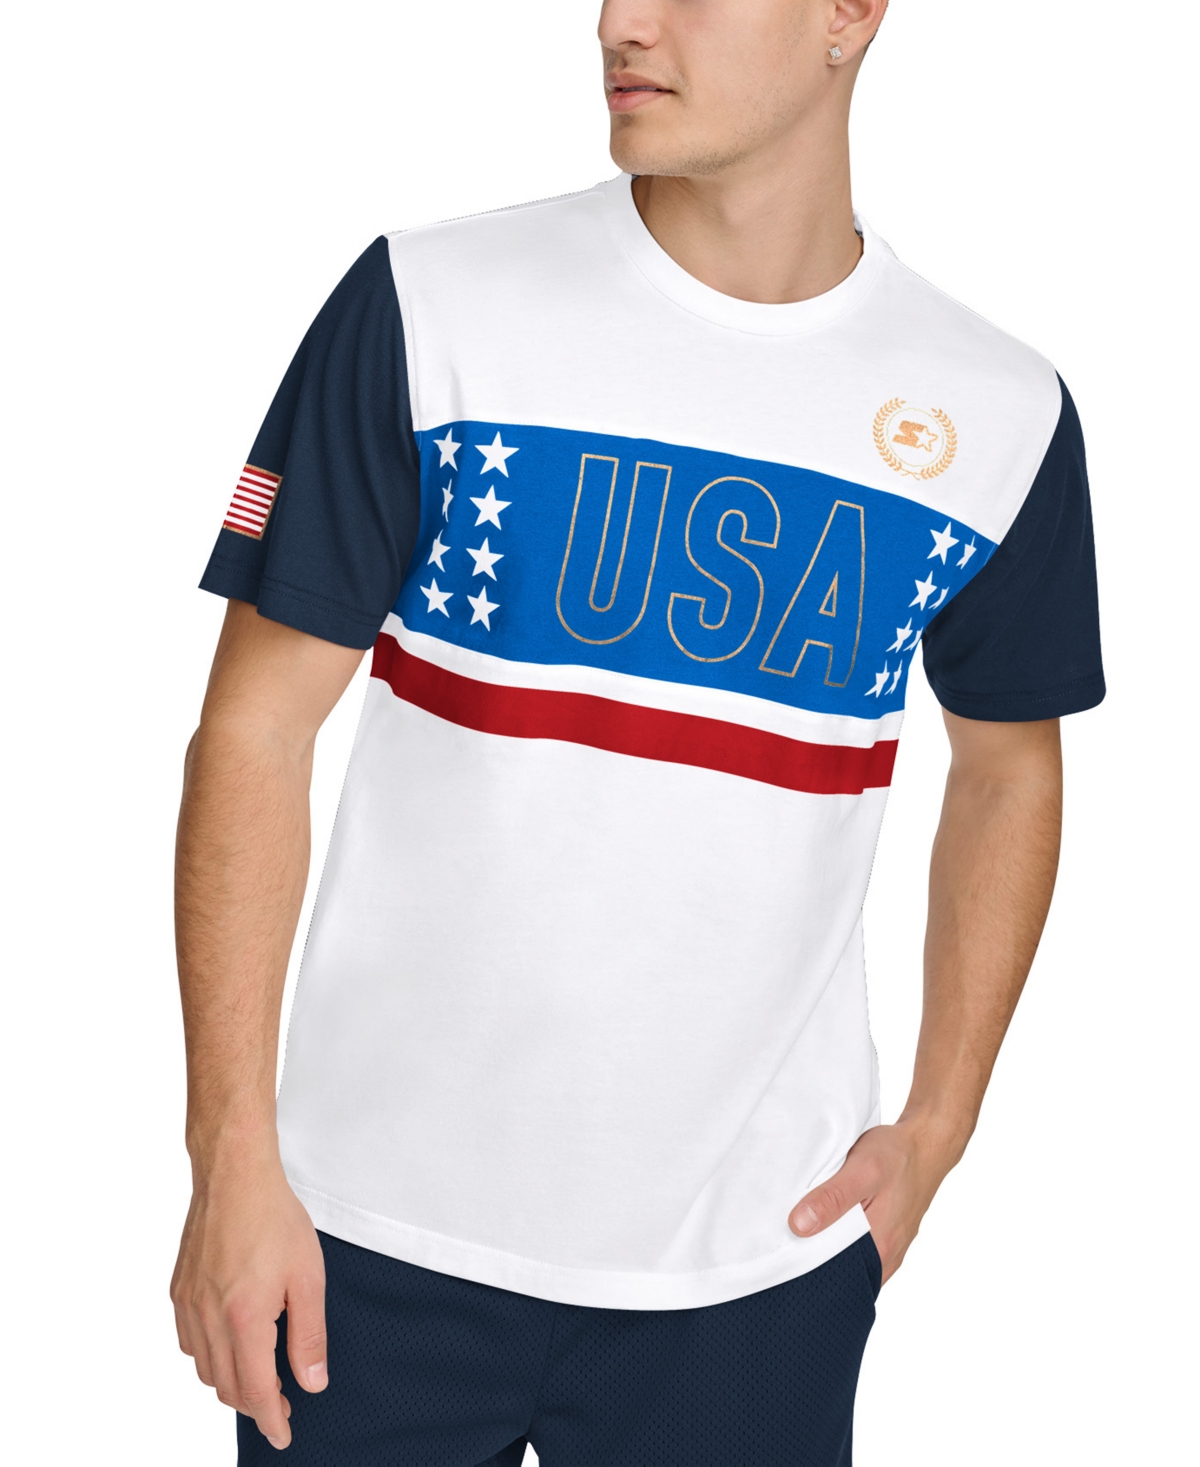 Men's Opening Ceremony Colorblocked Graphic T-Shirt - White